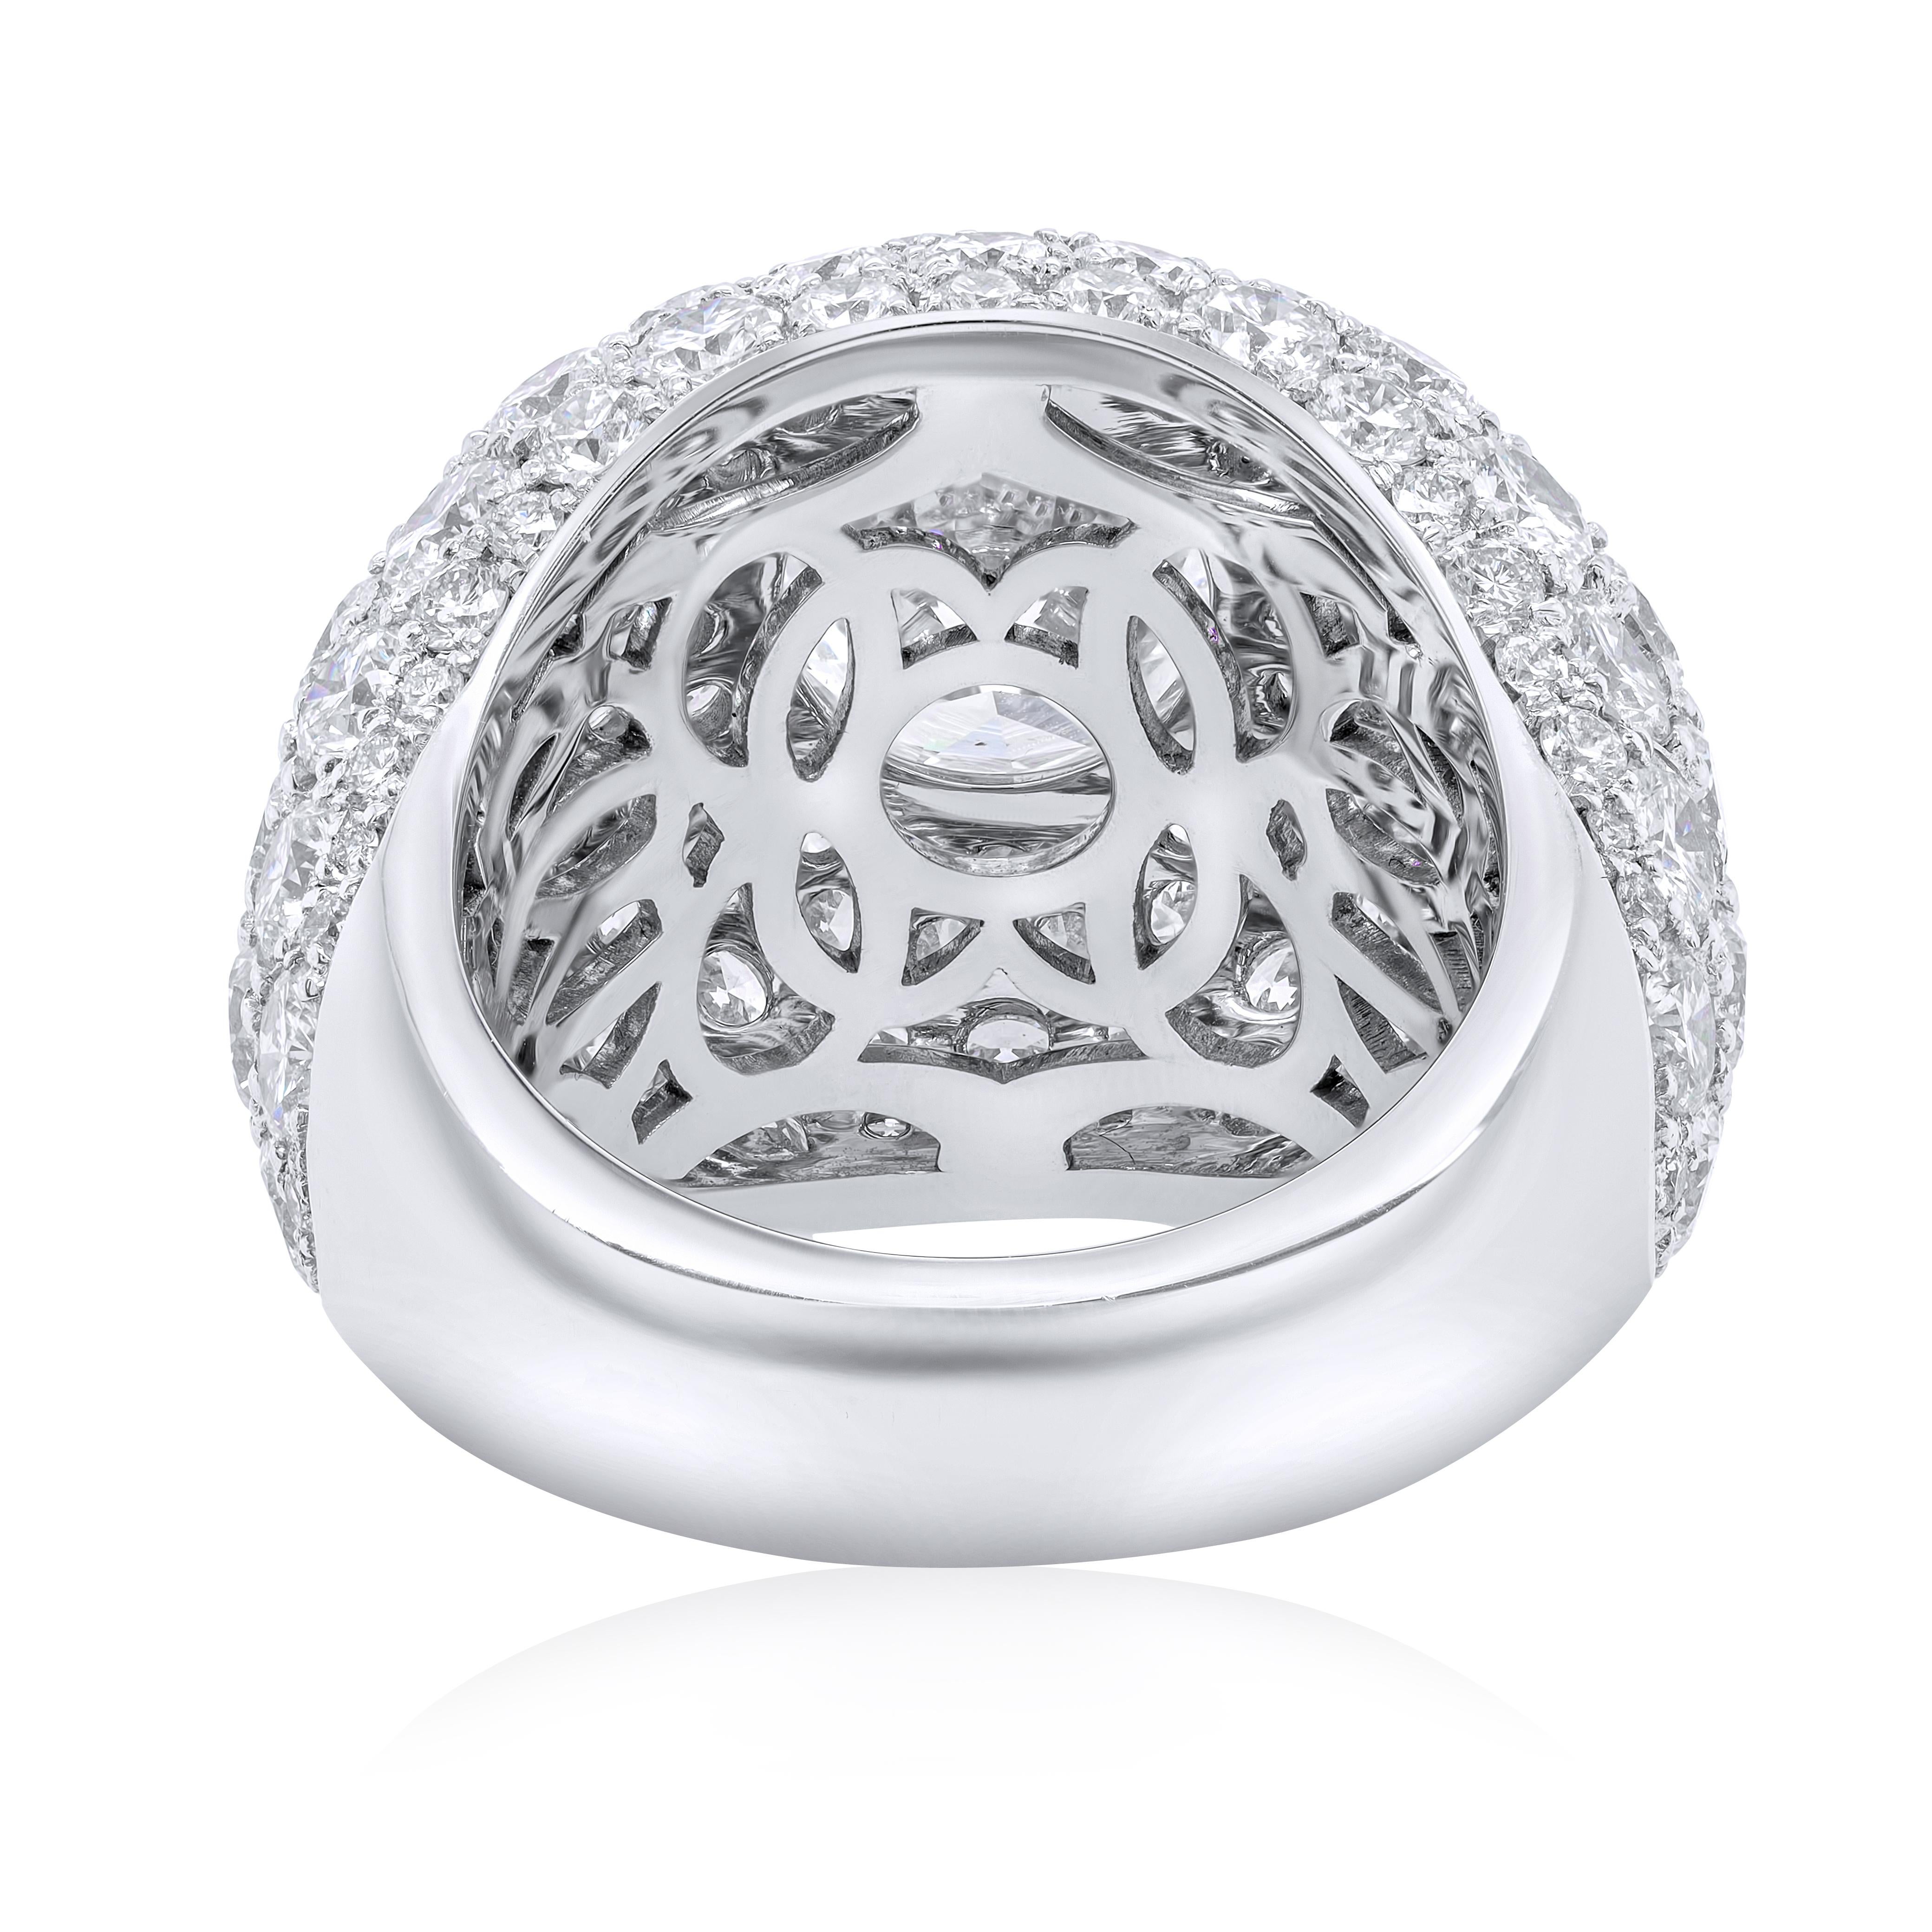 18K White Gold Diamond Exquisite Diamond Ring, features 4.56 Carat in the center J Color SI2 in Clarity GIA Certified set with 10.10 Carats of diamonds around.